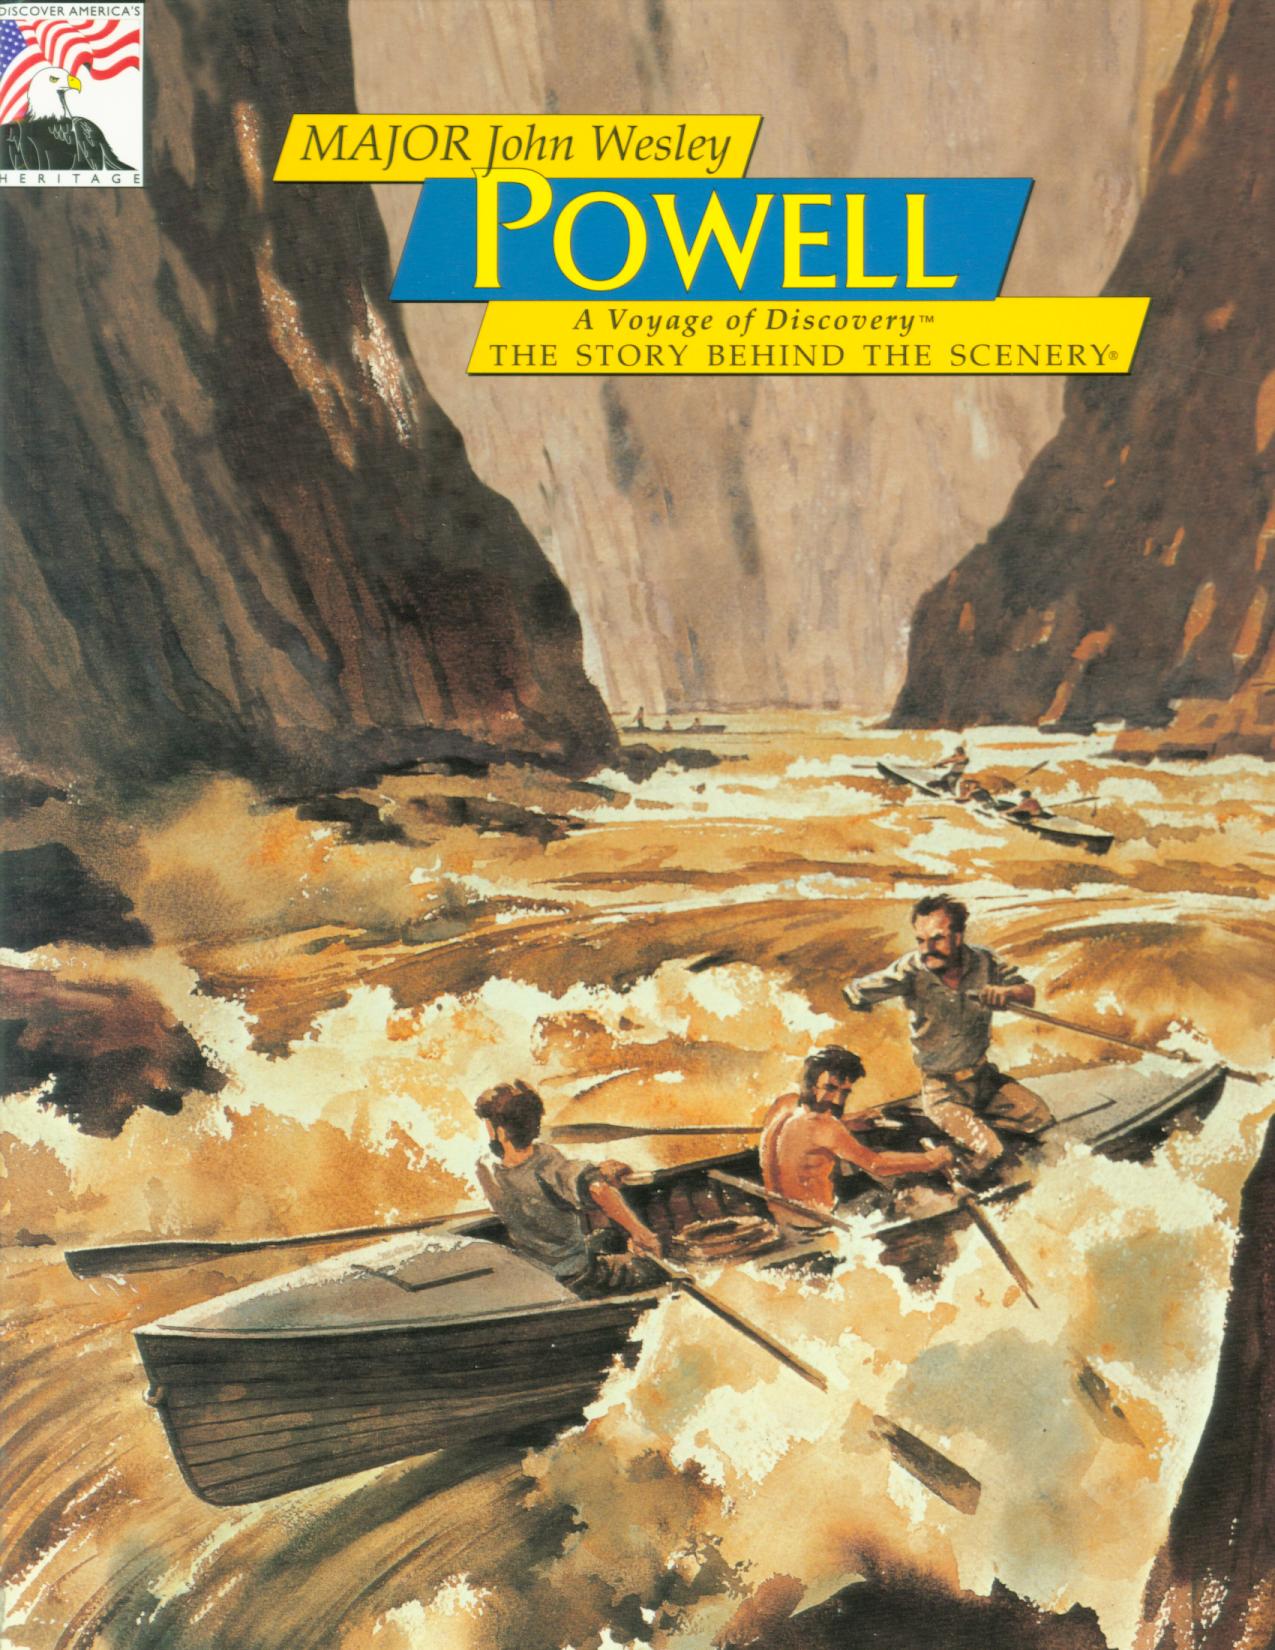 MAJOR JOHN WESLEY POWELL: voyage of discovery--the story behind the scenery. 